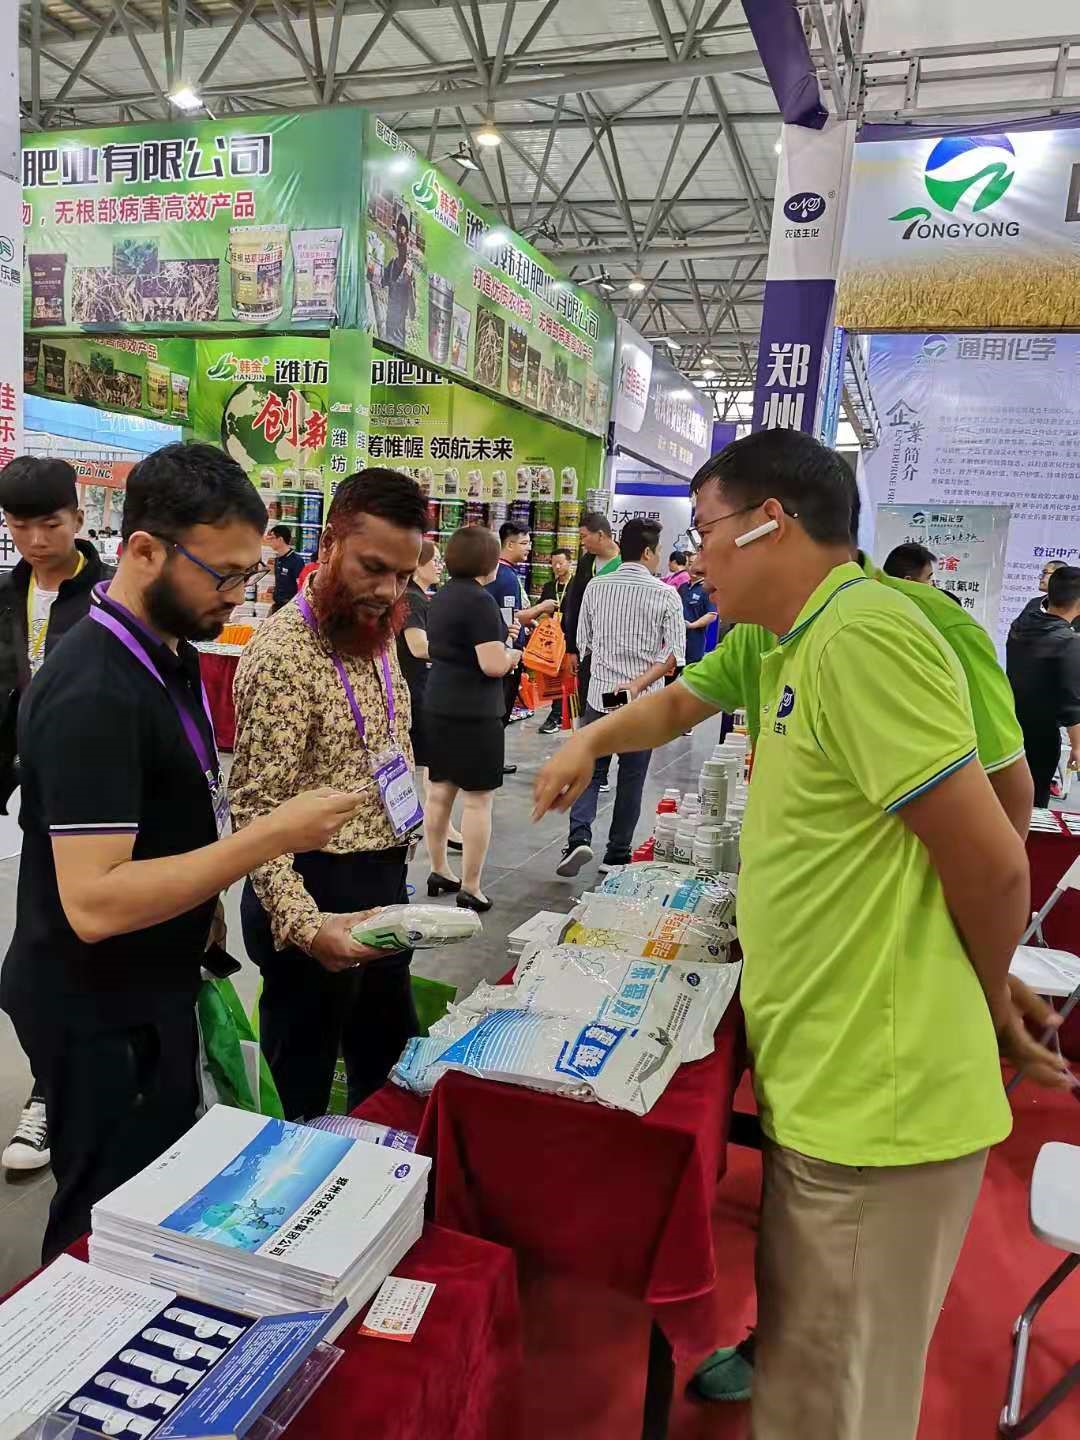 Our company participated in the 16th Southwest Agricultural Fair(图2)